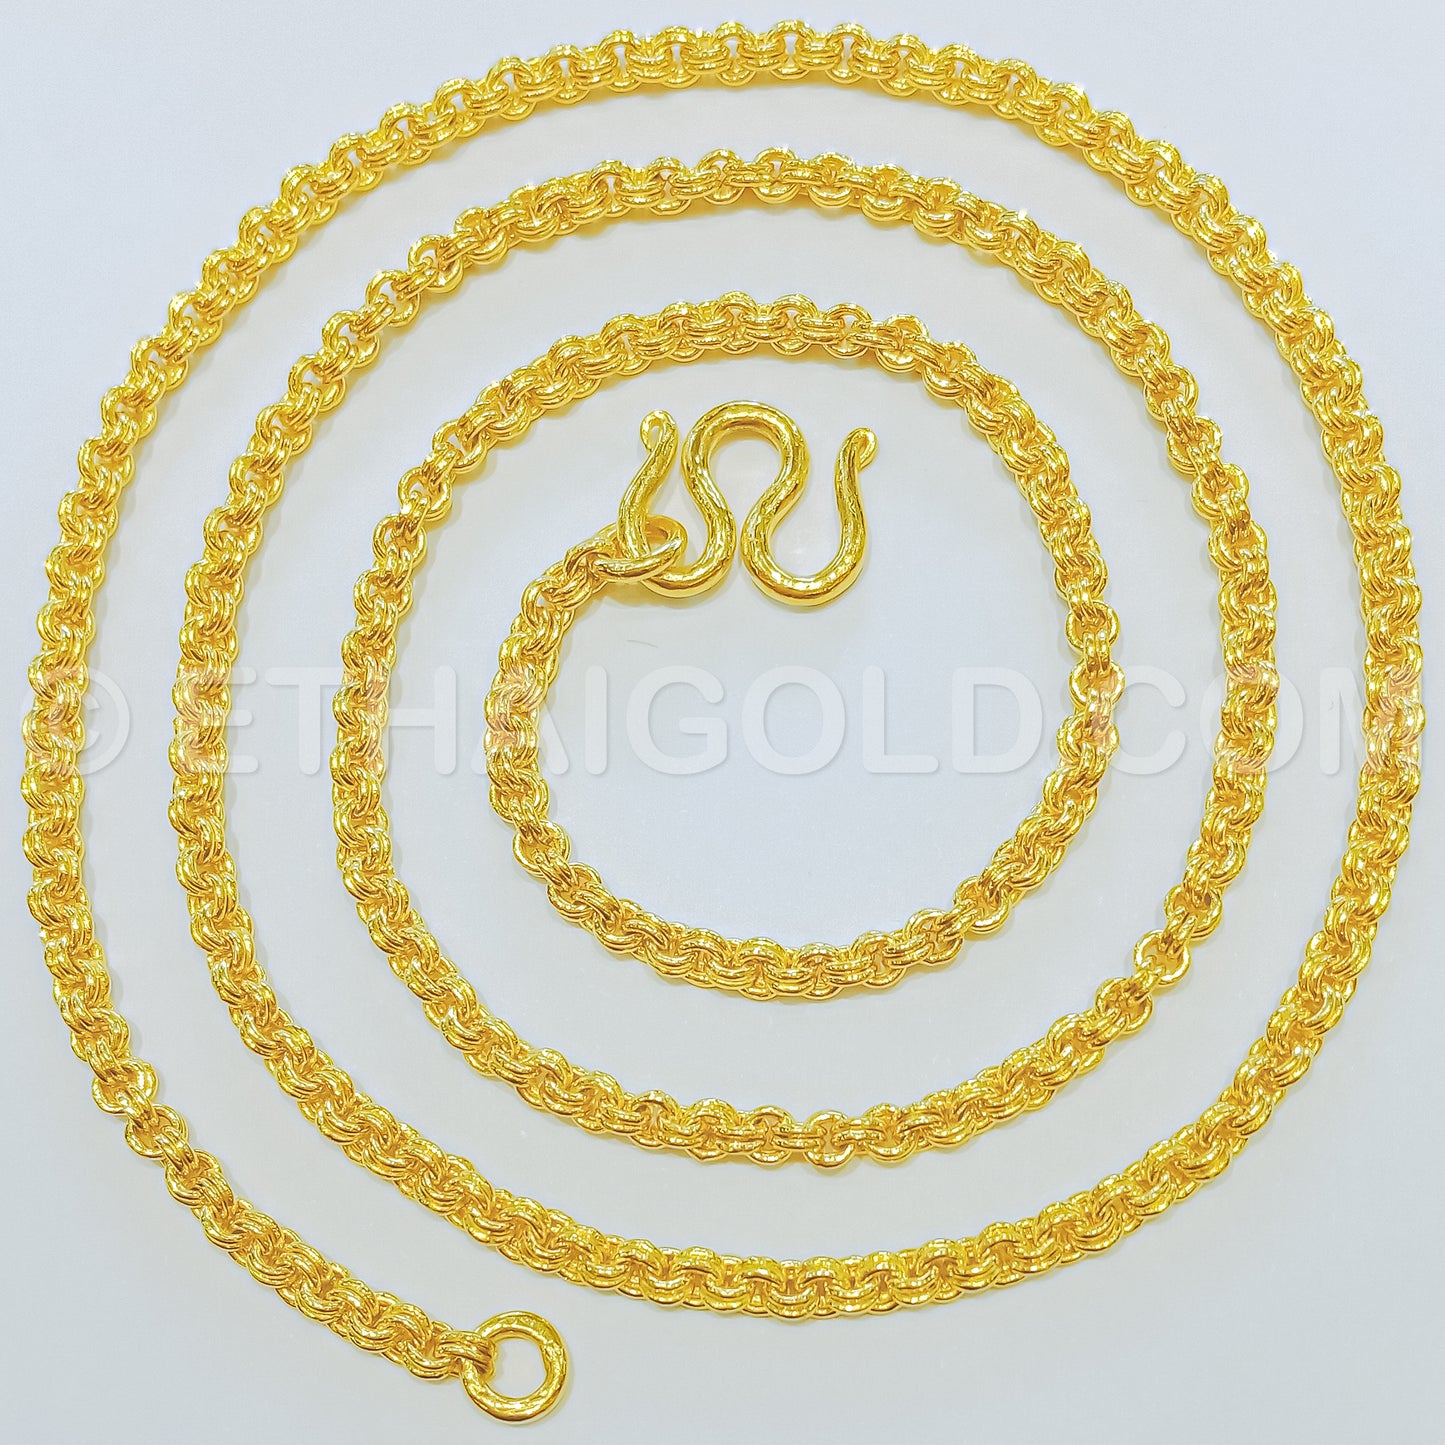 1/2 BAHT POLISHED SOLID DOUBLE LINK CHAIN NECKLACE IN 23K GOLD (ID: N1102S)